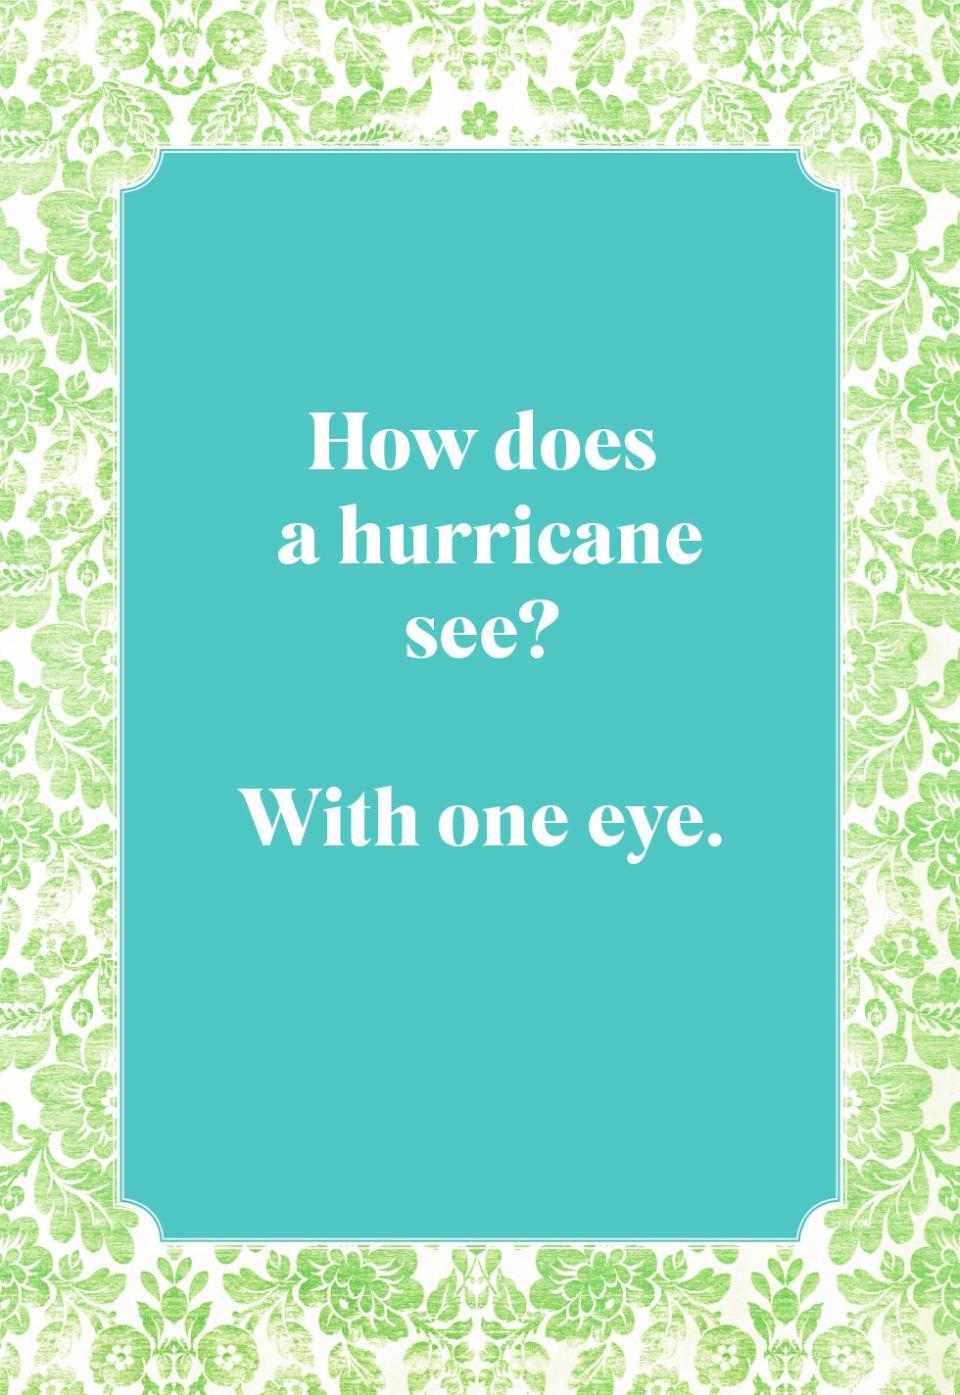 How does a hurricane see?